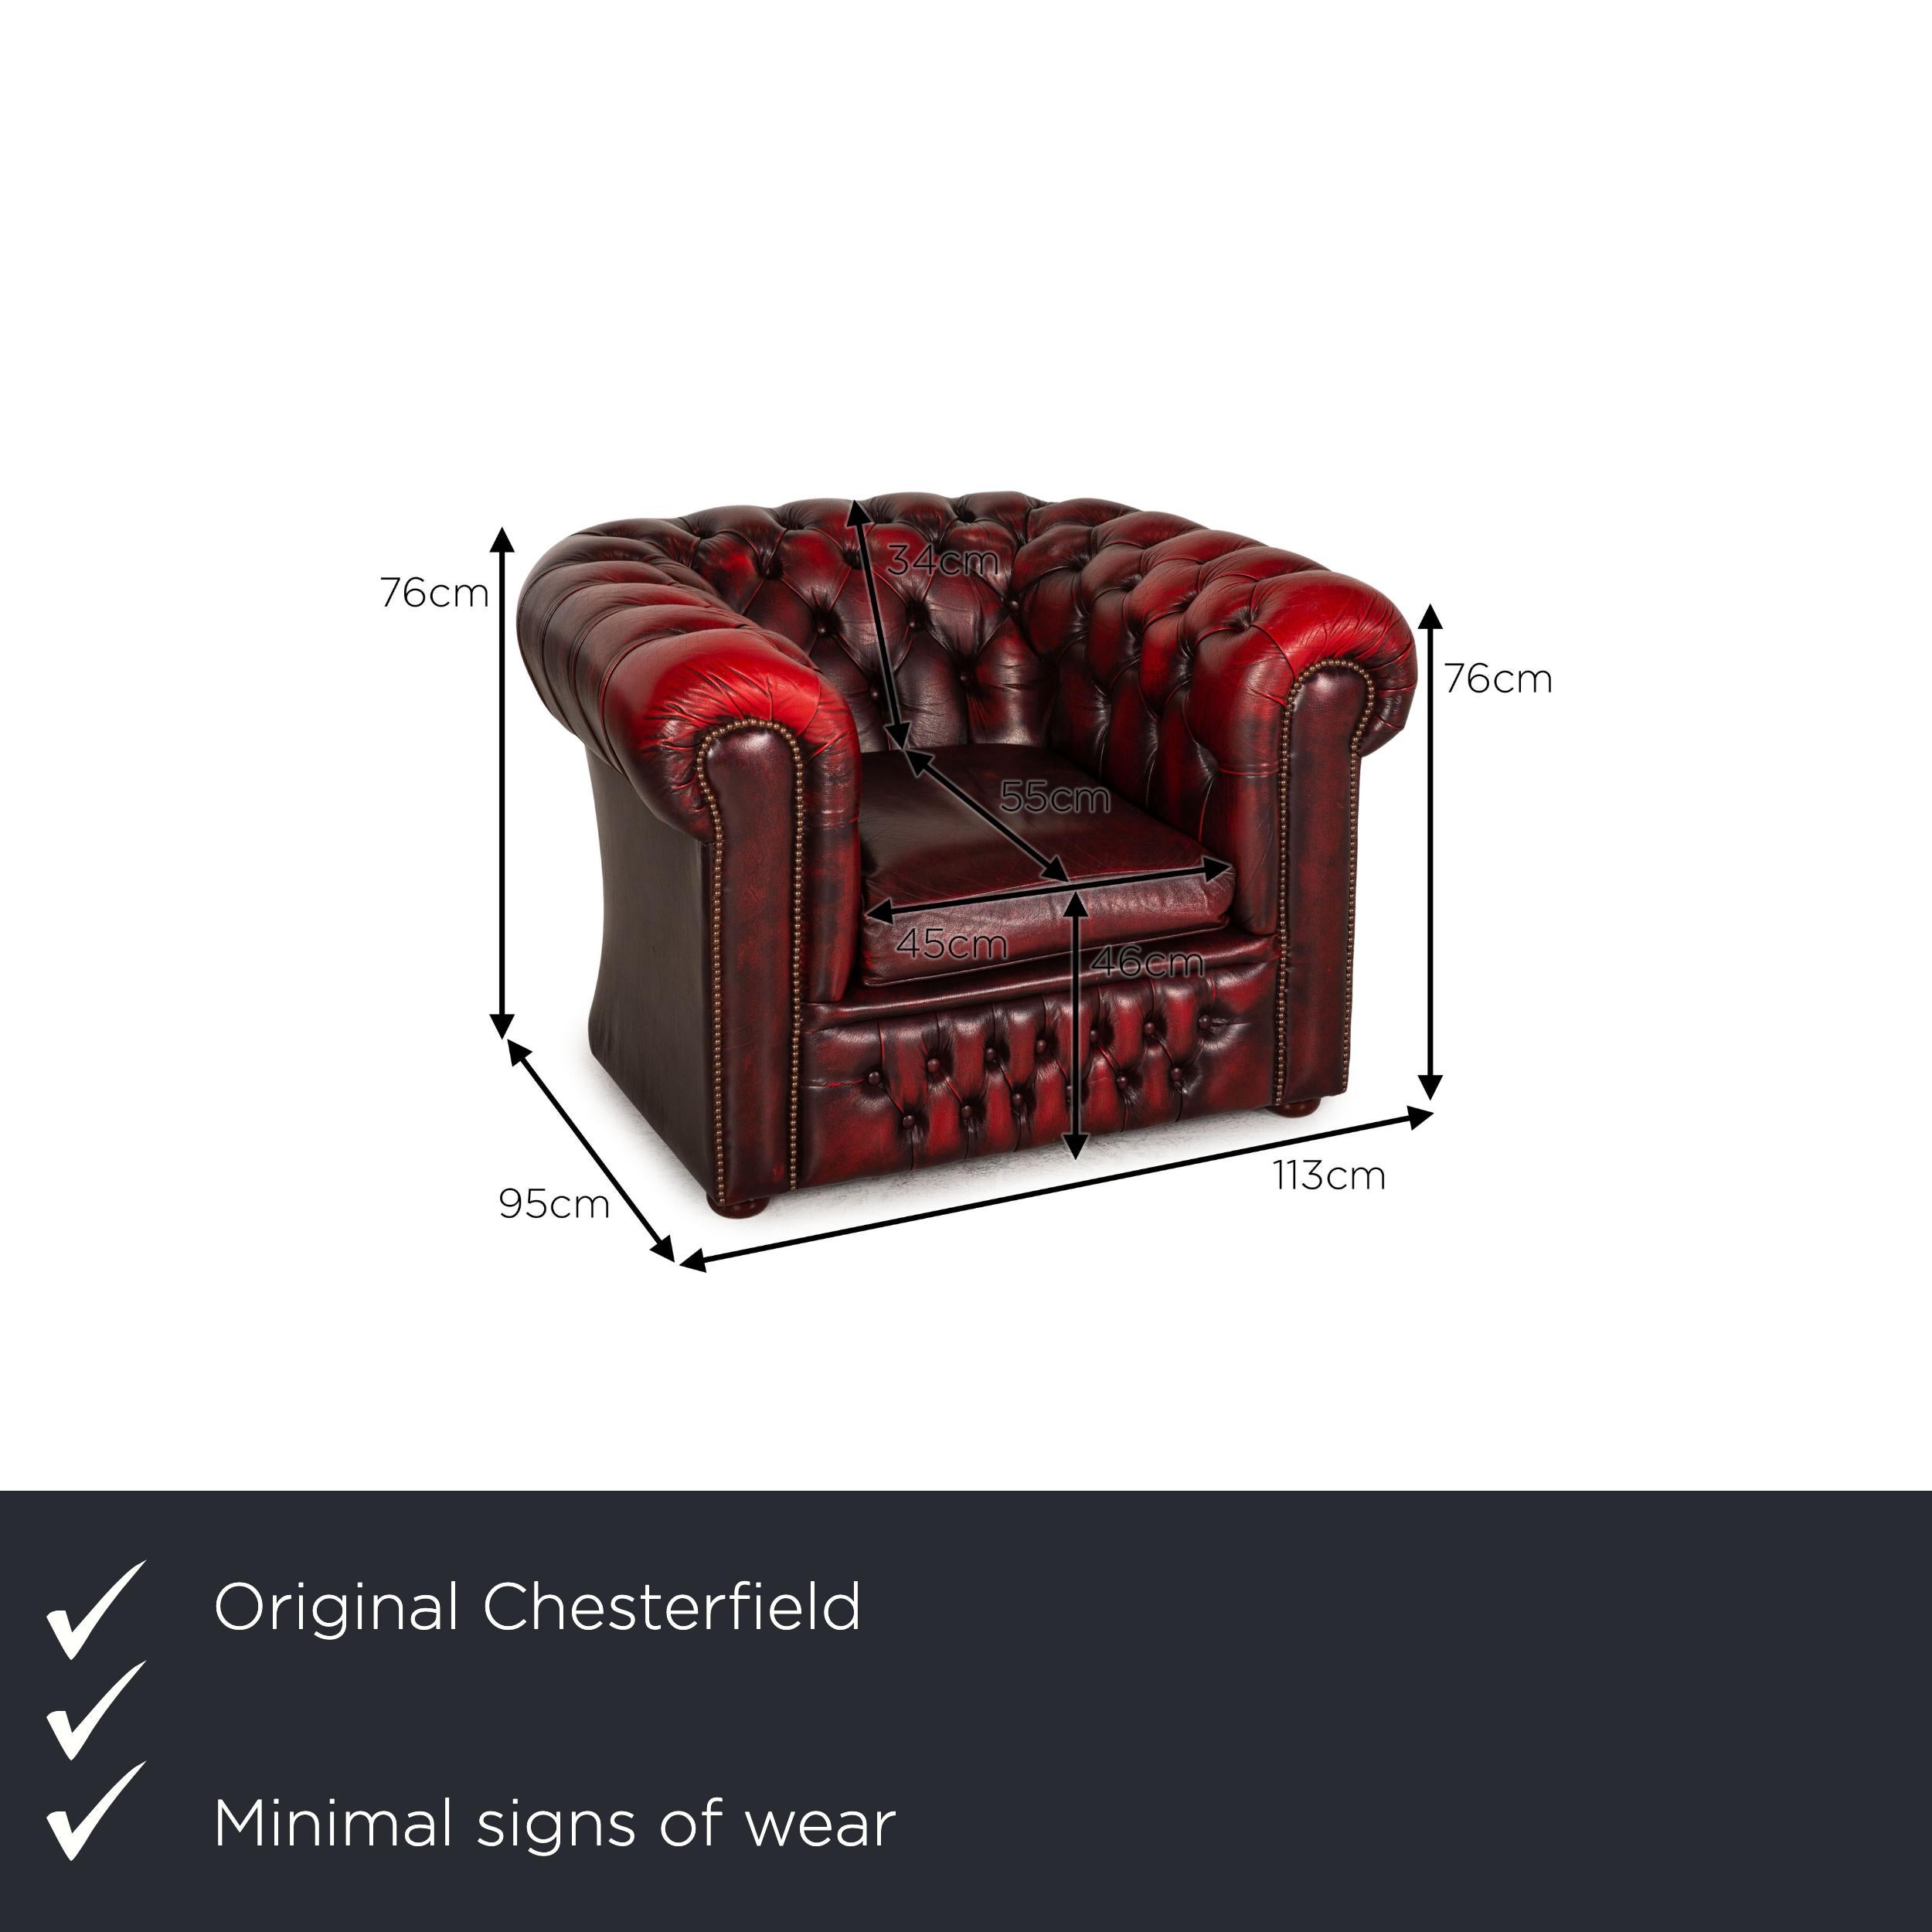 We present to you a Chesterfield Tudor leather armchair dark red.

Product measurements in centimeters:

depth: 95
width: 113
height: 76
seat height: 46
rest height: 76
seat depth: 55
seat width: 45
back height: 34.

 